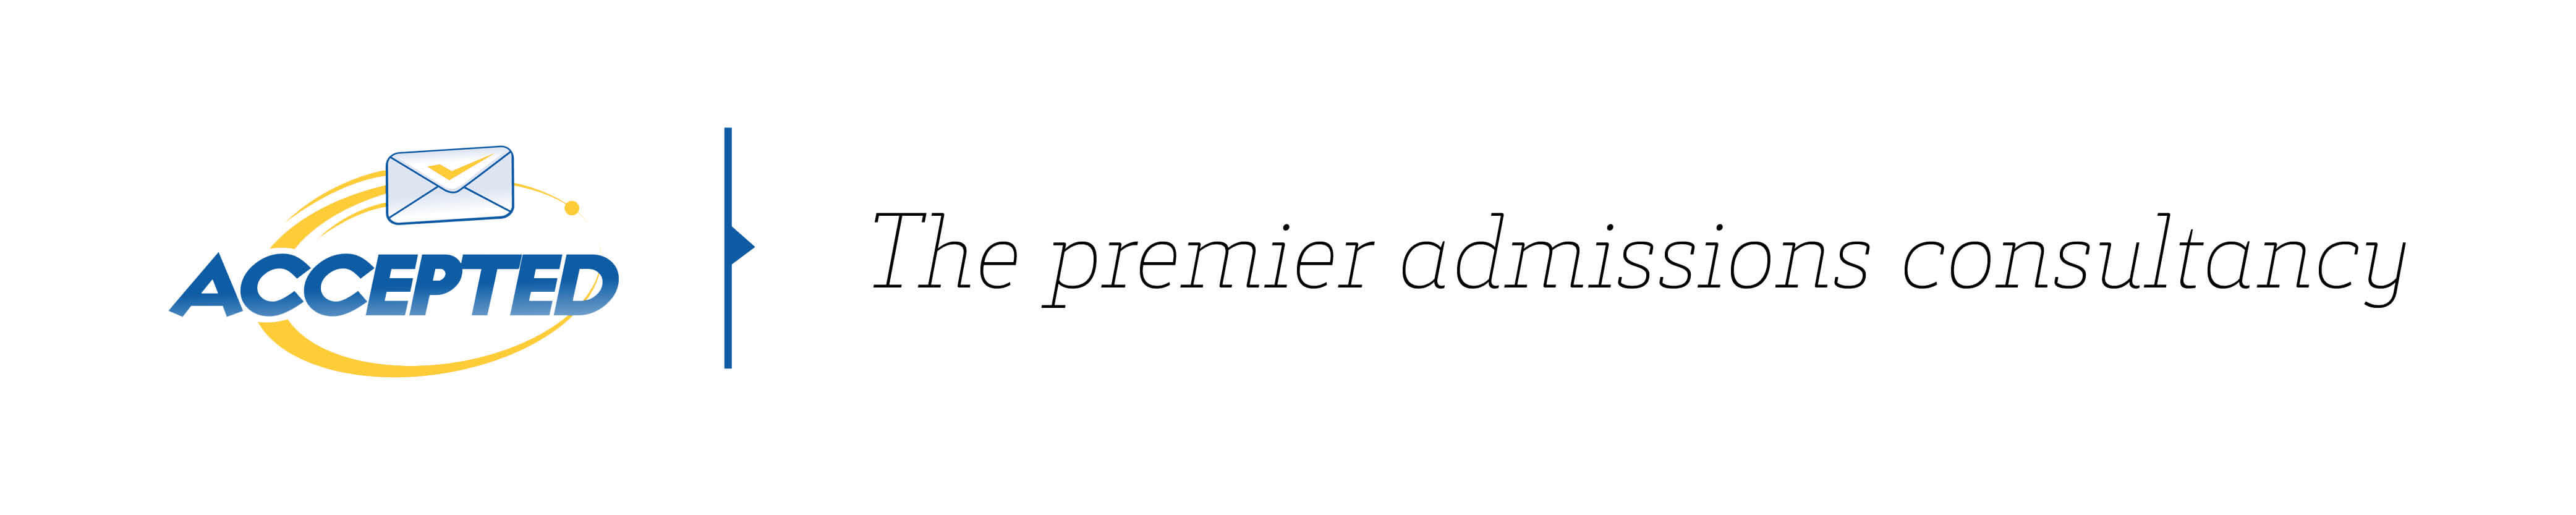 Accepted - The Premier Admissions Consultancy